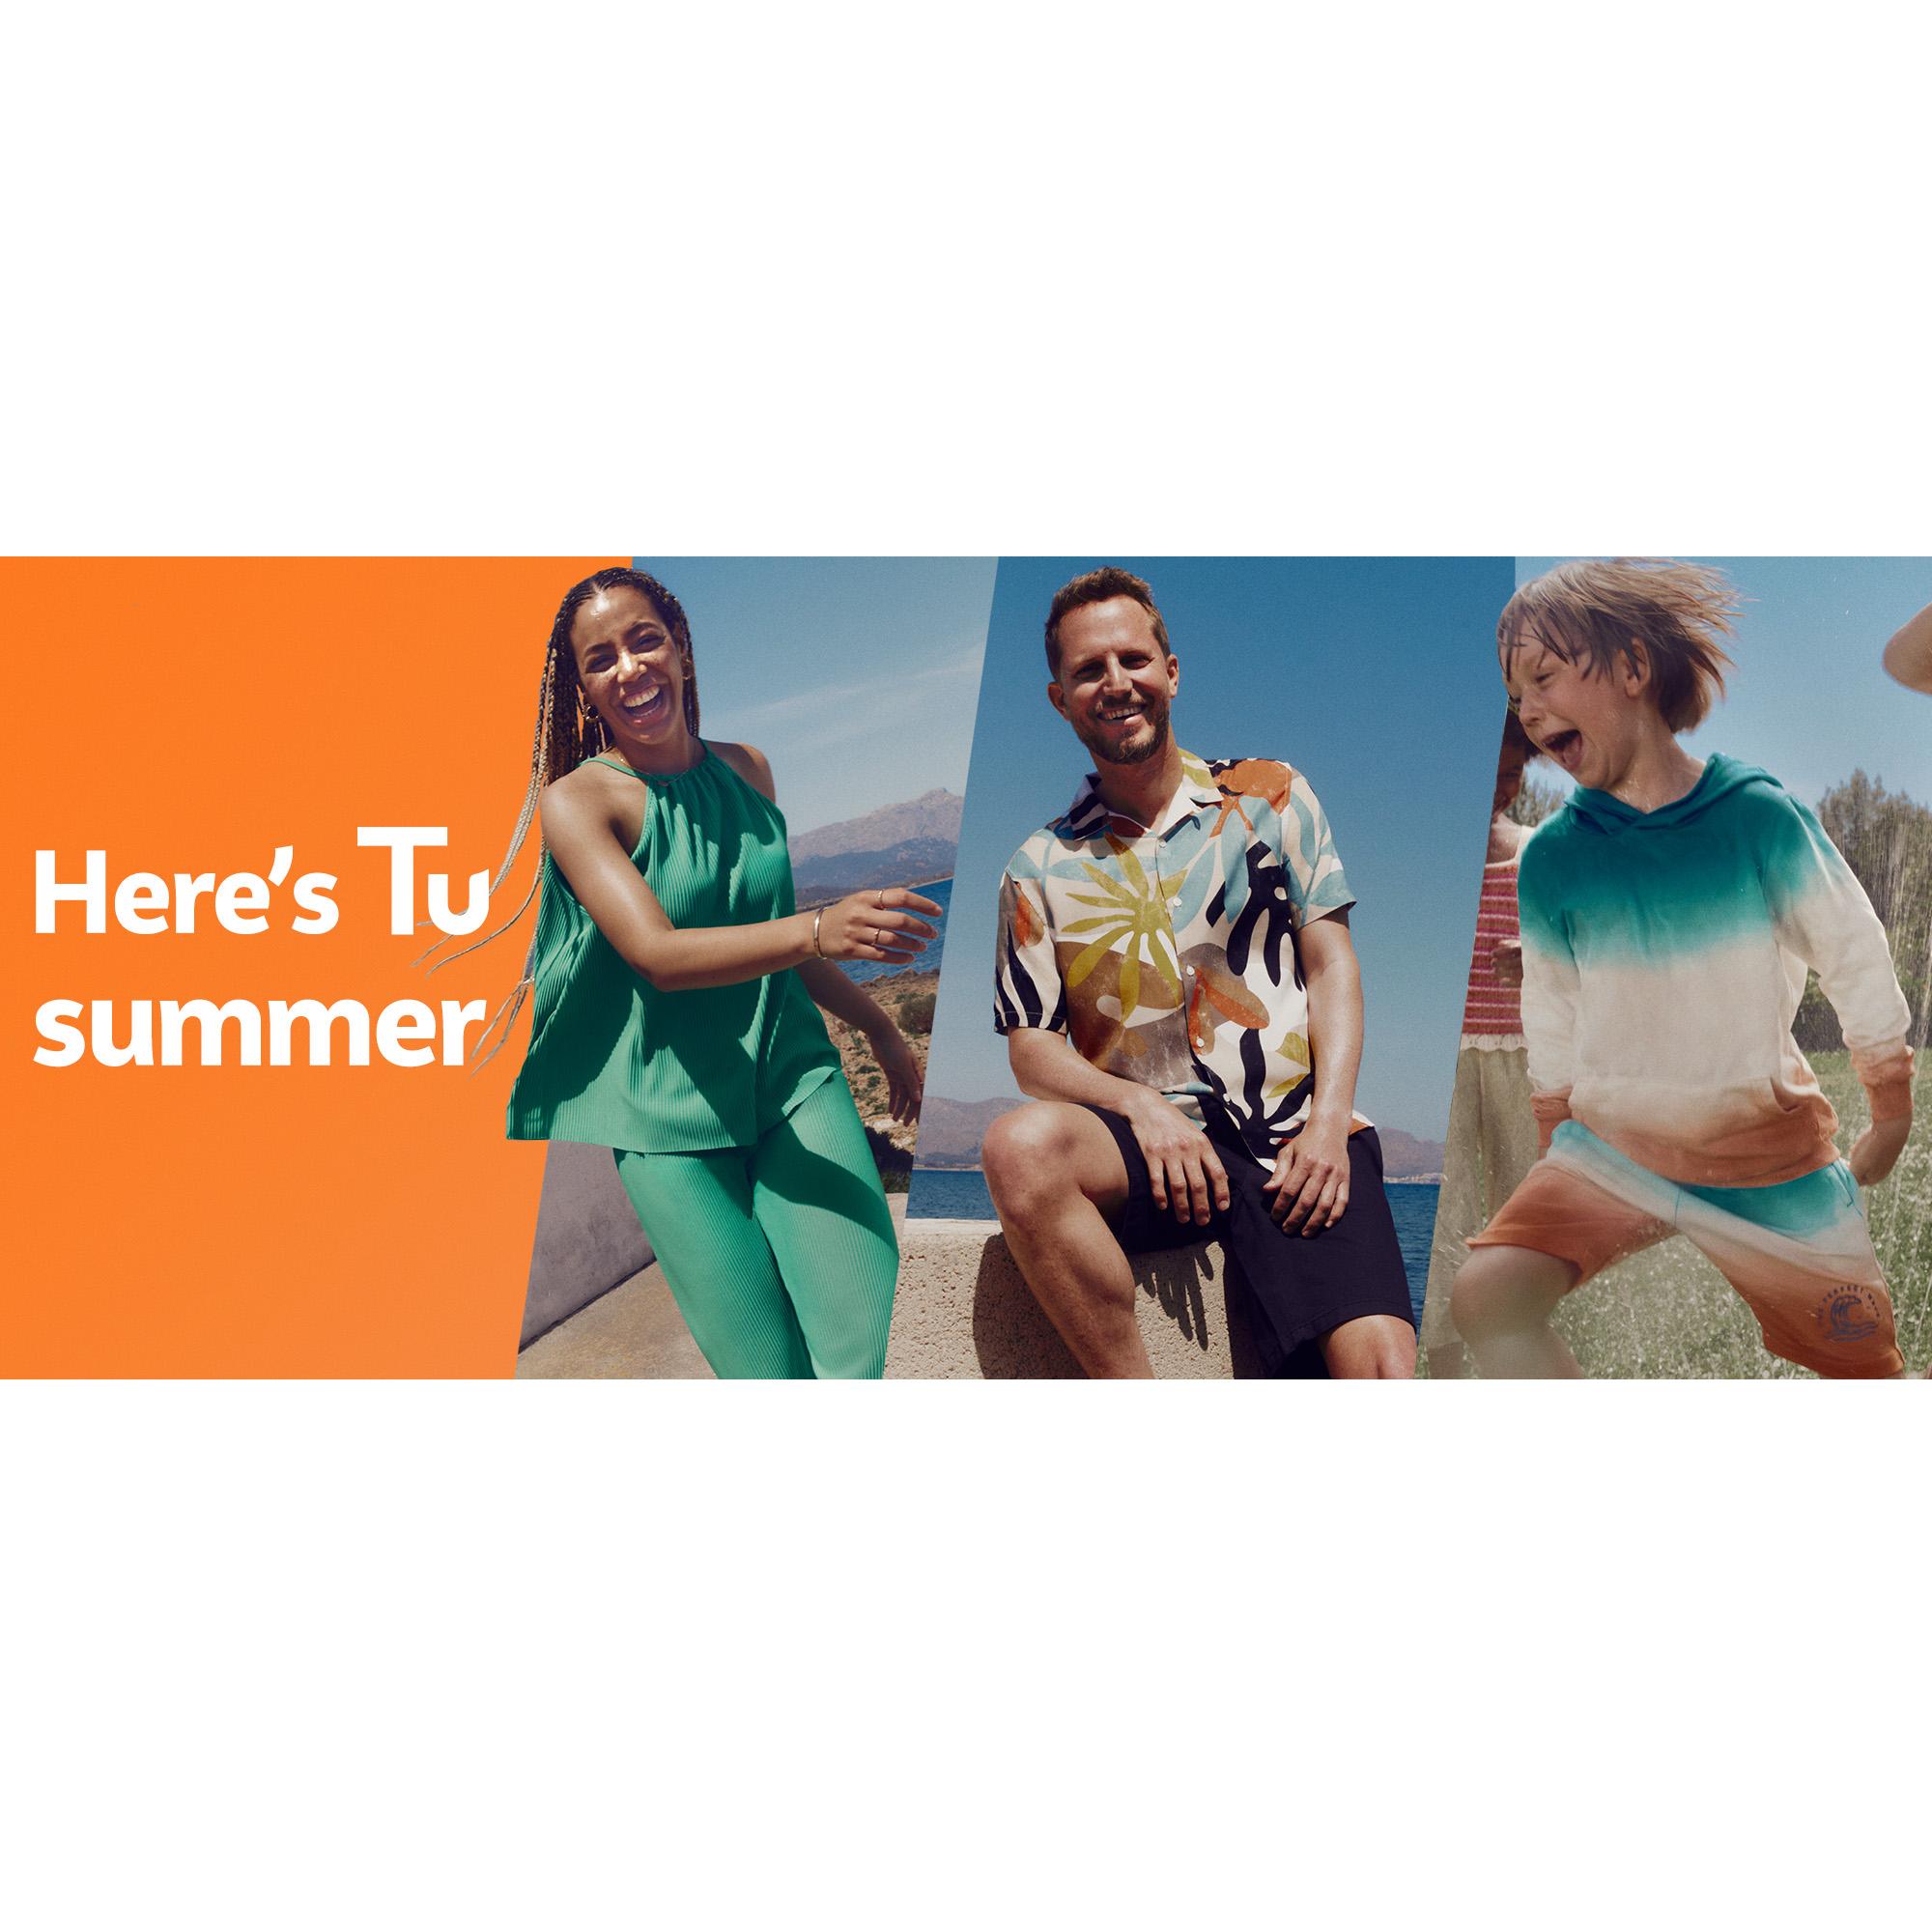 Here's Tu summer. Your one stop destination for fresh summer style.